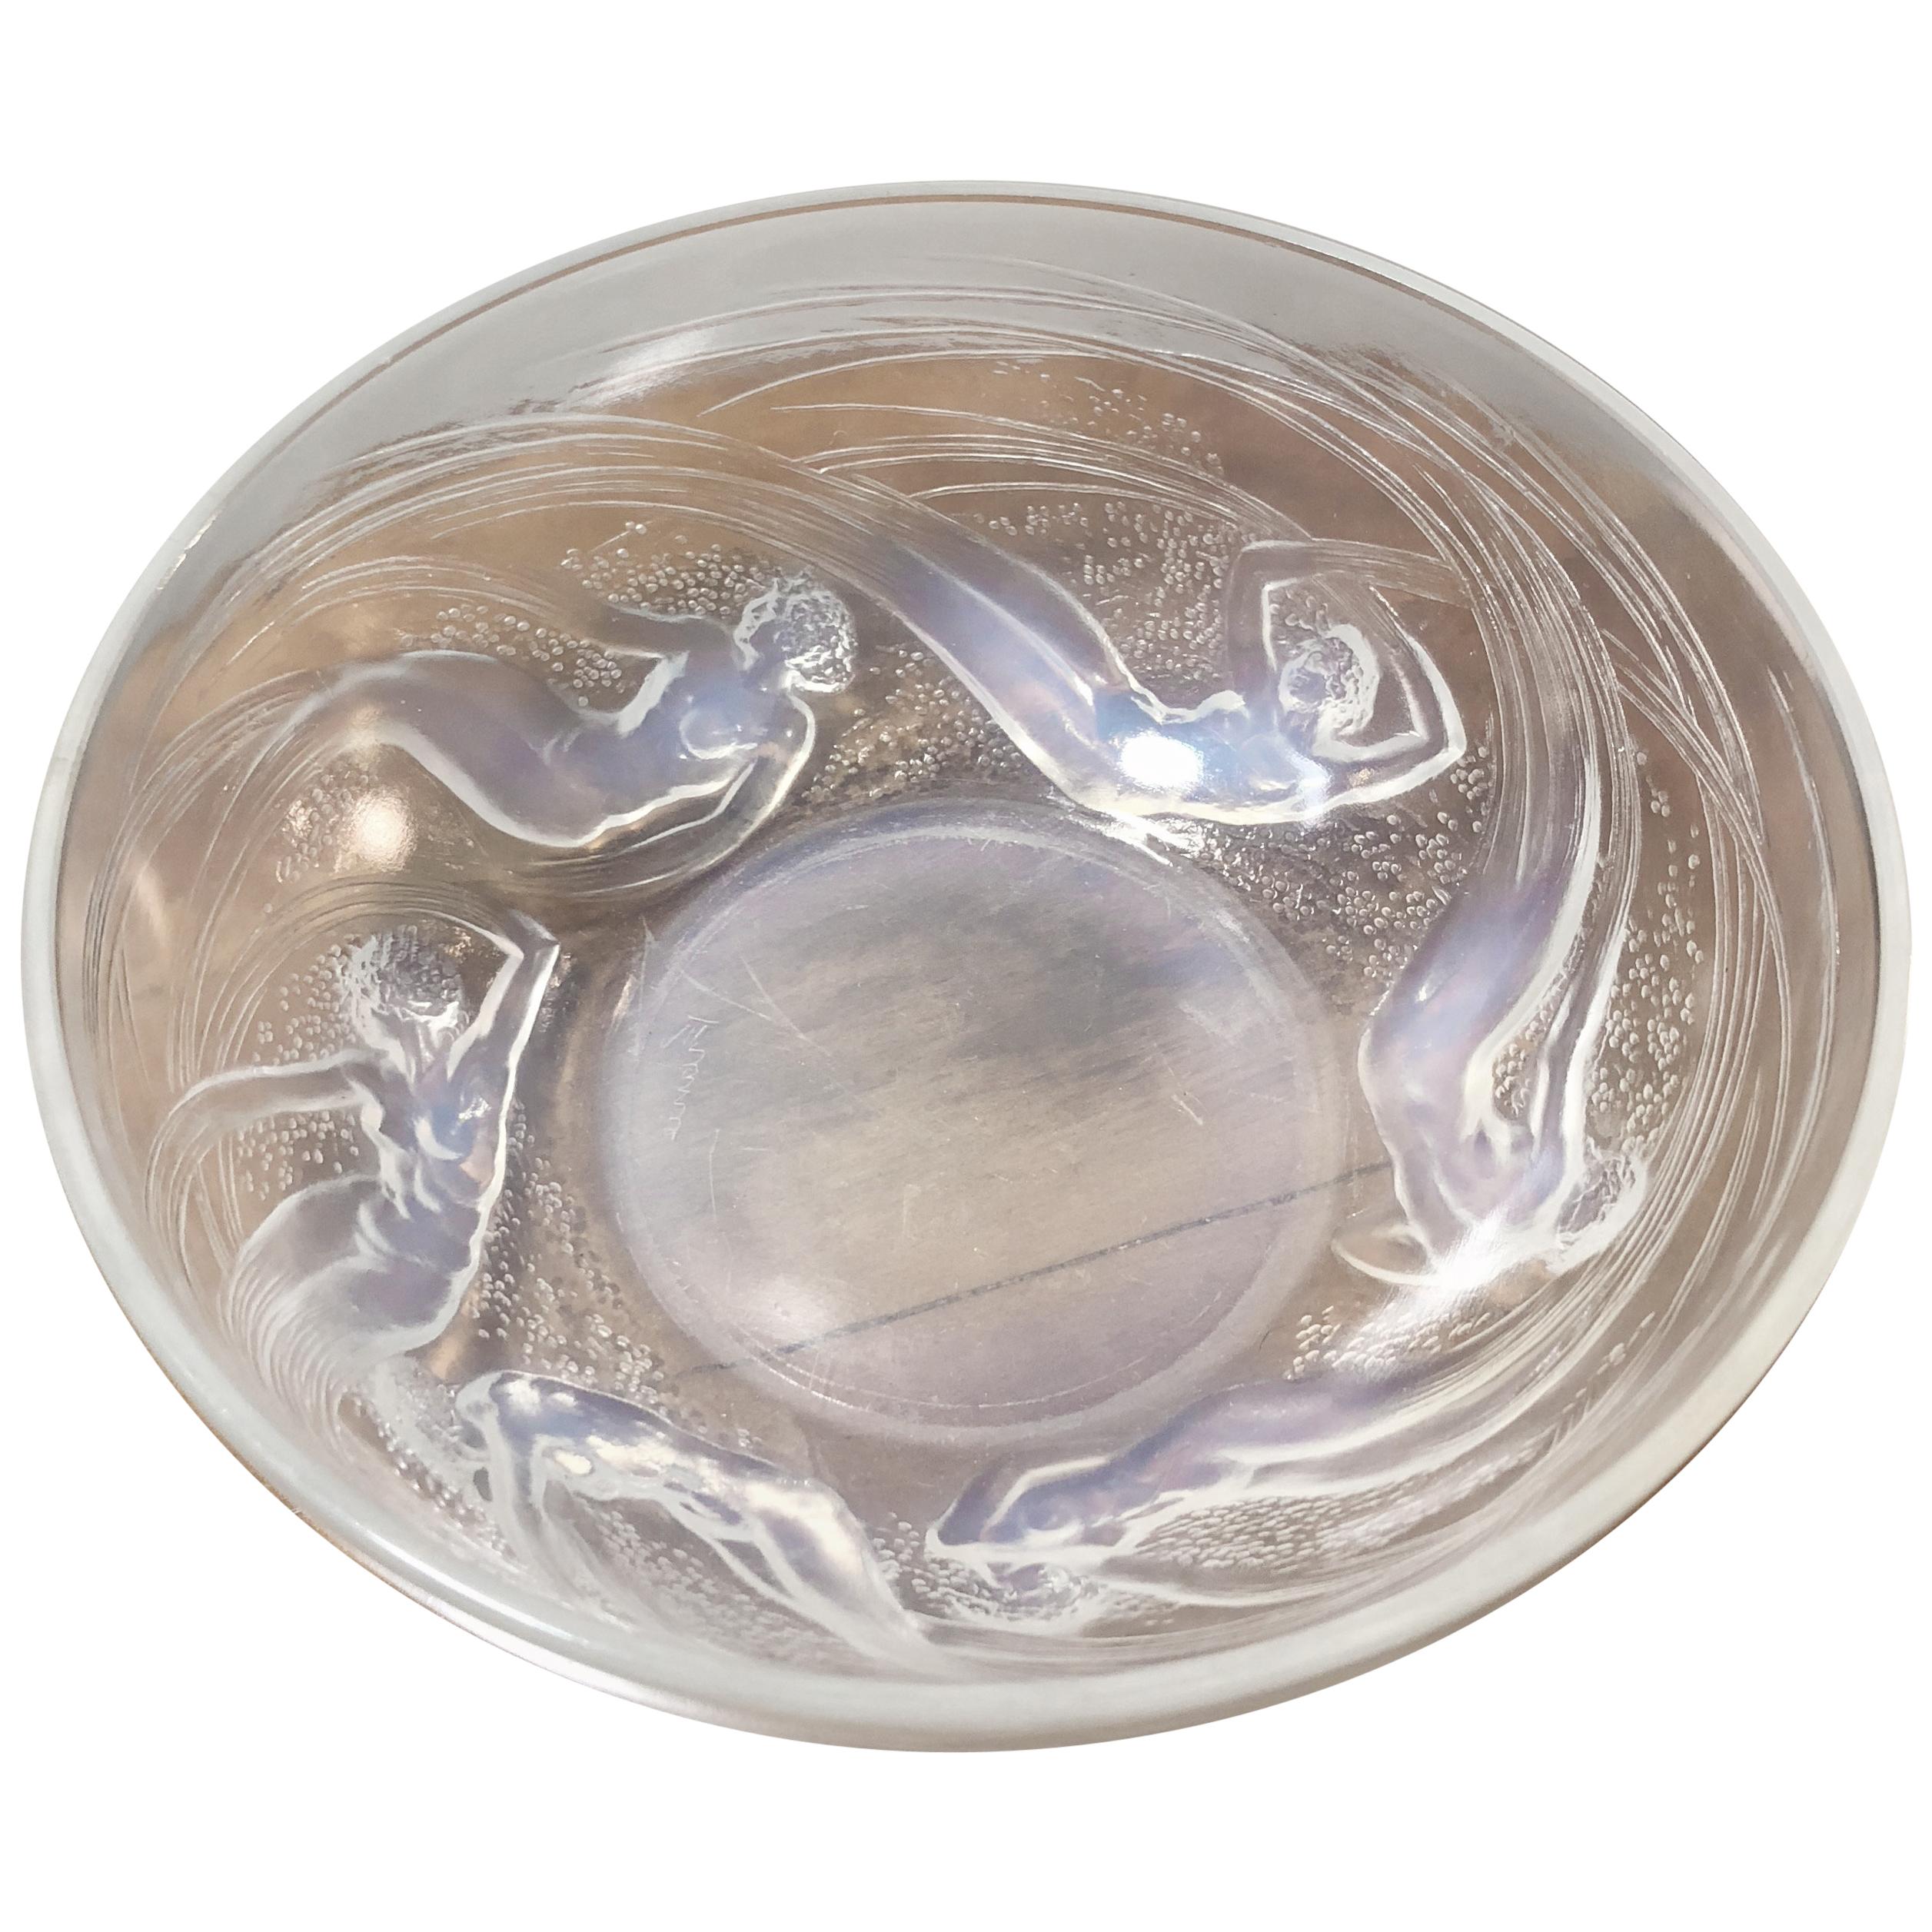 1921 René Lalique Ondines Bowl Opalescent Glass, Swimming Mermaid